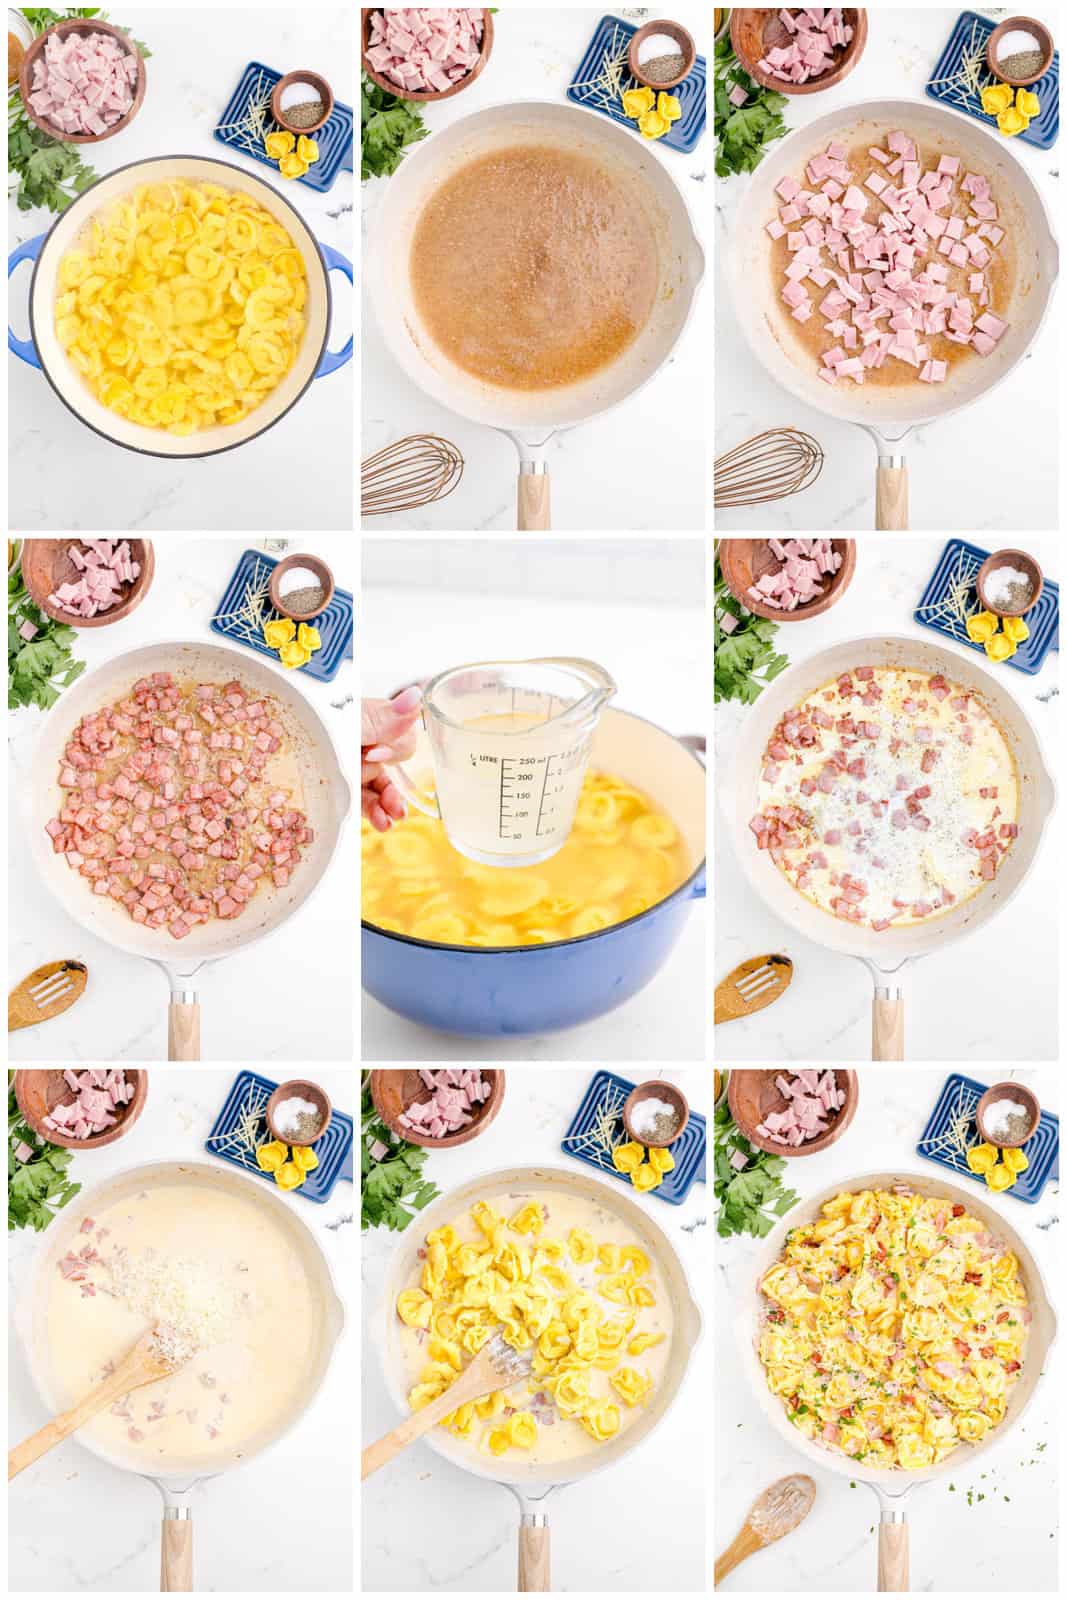 Step by step photos on how to make Tortellini alla Panna.